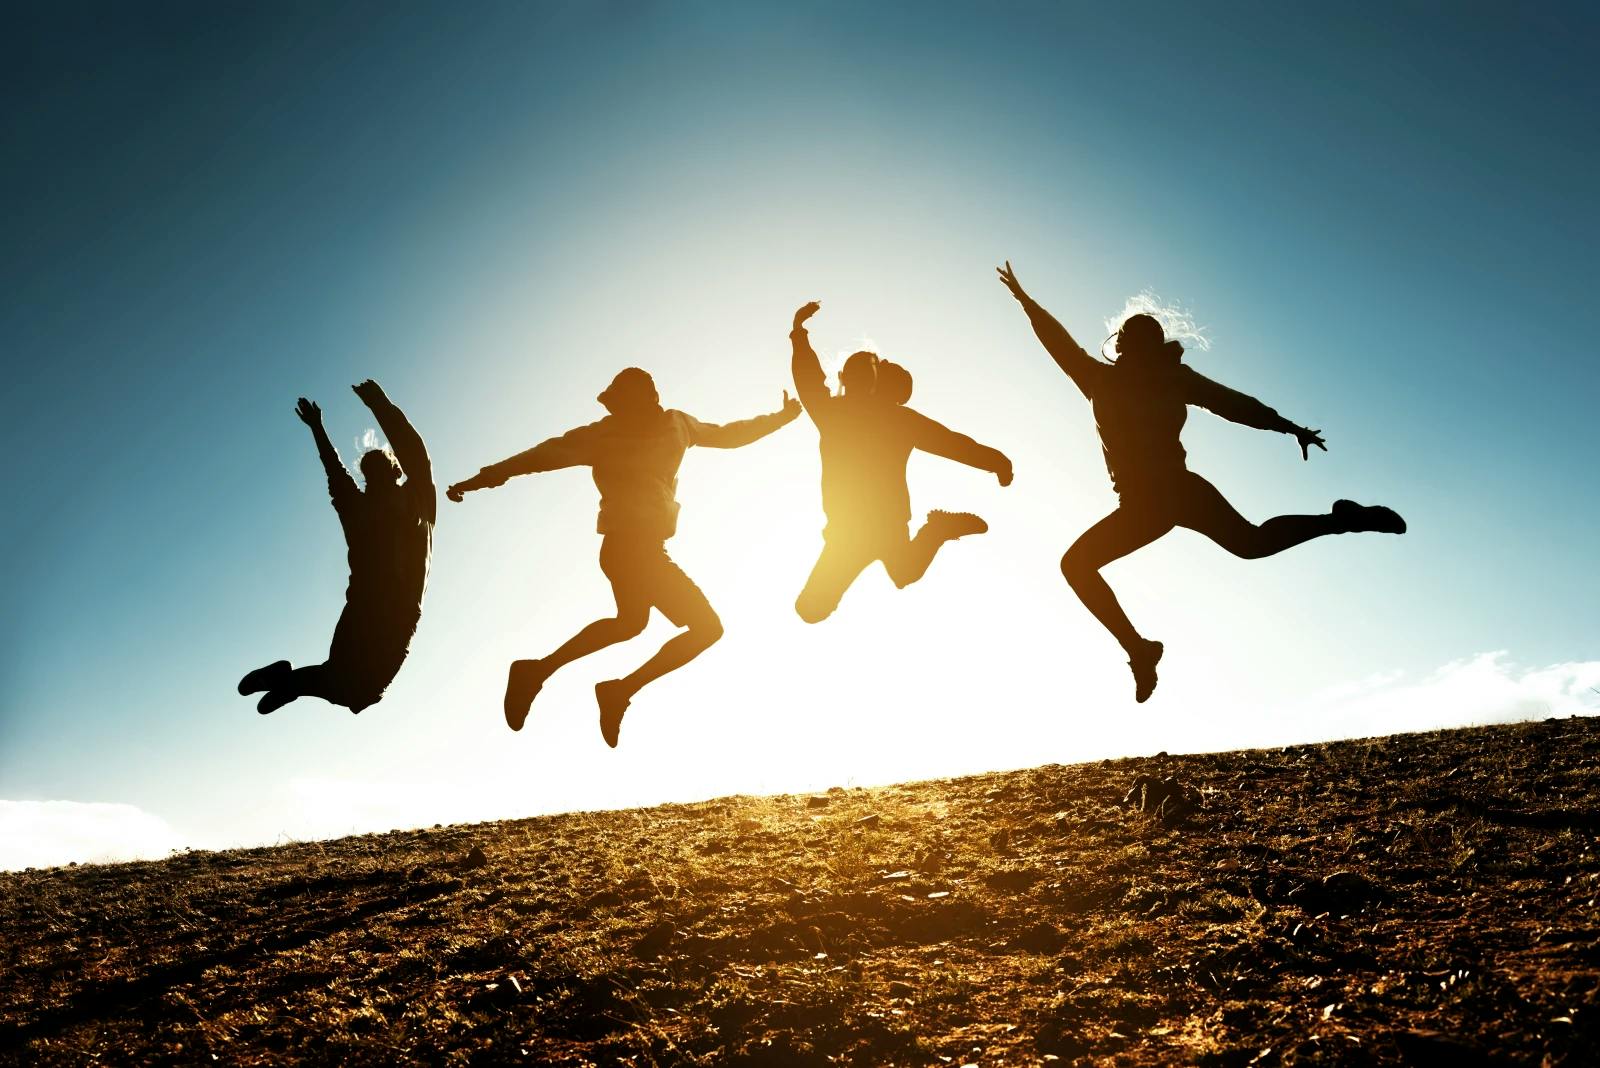 A photo of four individuals jumping for joy as silhouettes in front of a sunset on a hill.